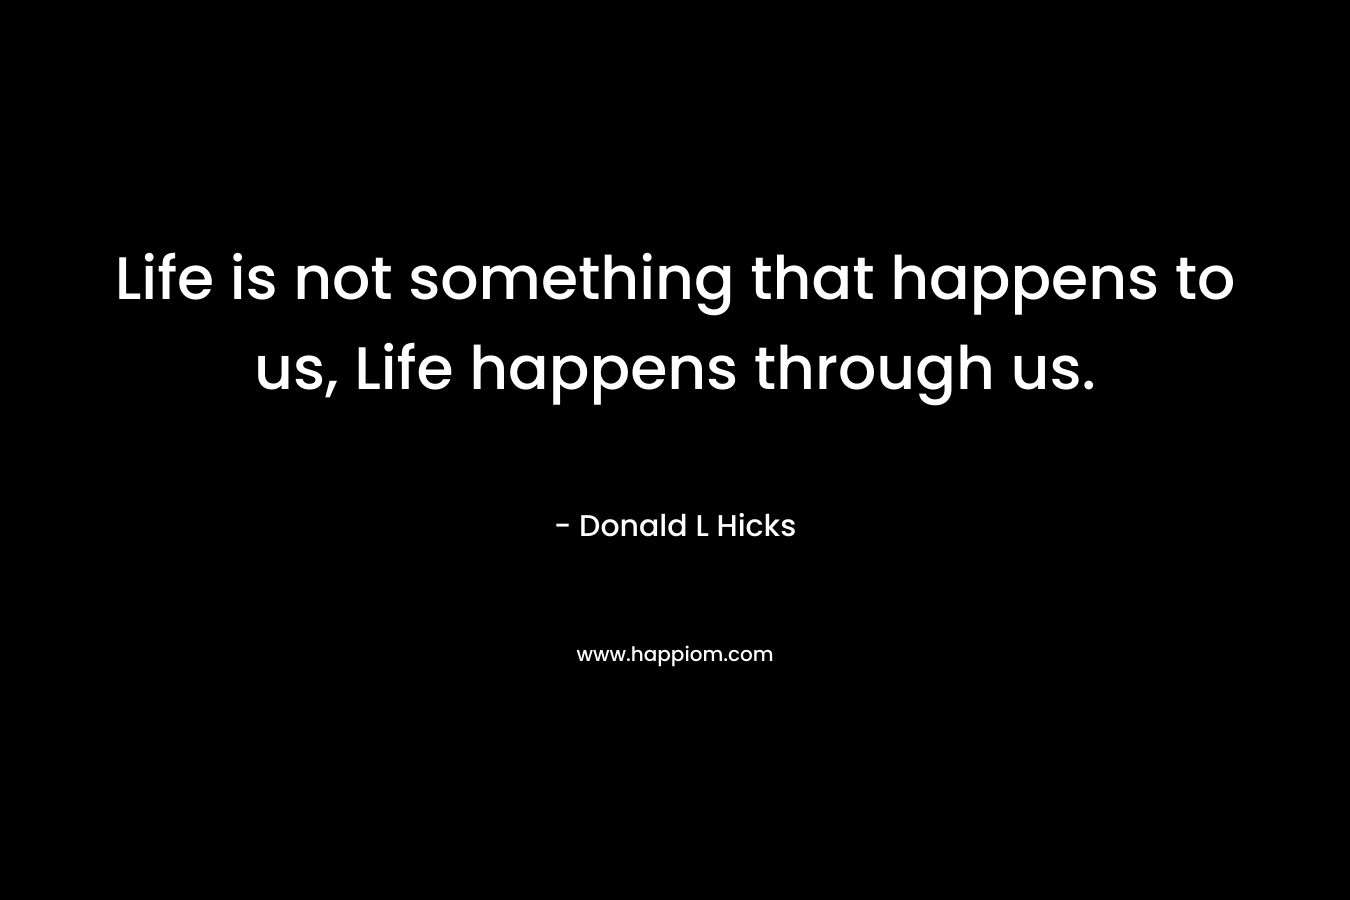 Life is not something that happens to us, Life happens through us.